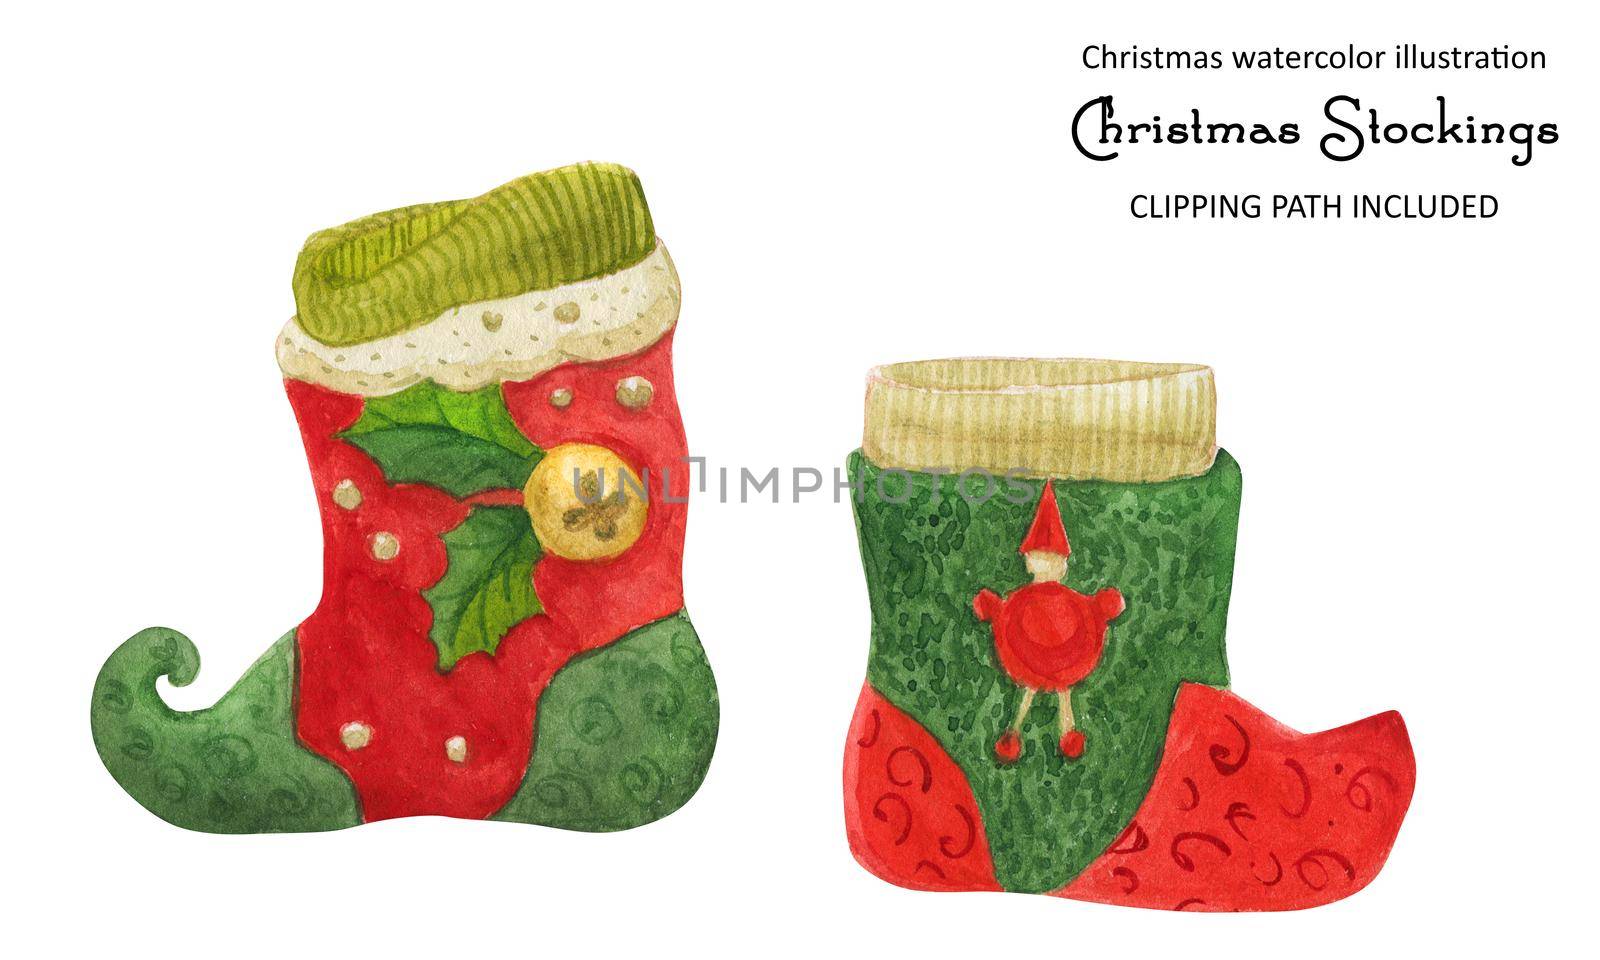 Christmas stockings, watercolor illustration by Xeniasnowstorm